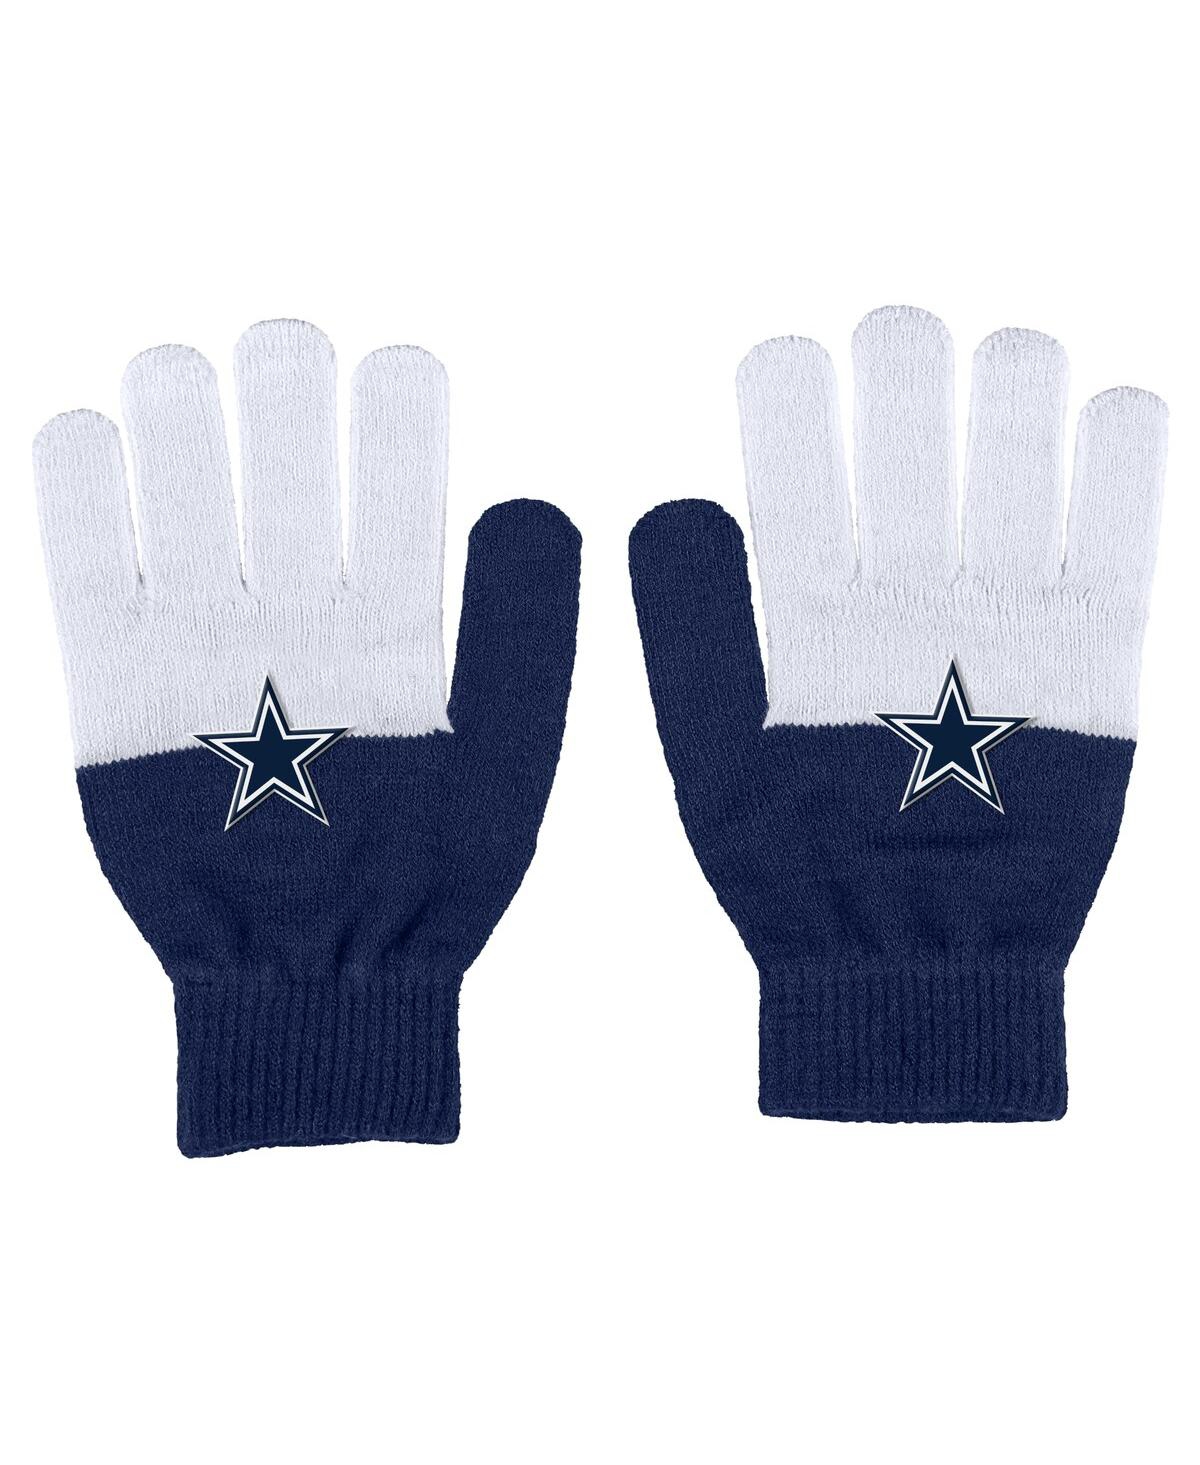 Women's Wear by Erin Andrews Dallas Cowboys Color-Block Gloves - Navy, White